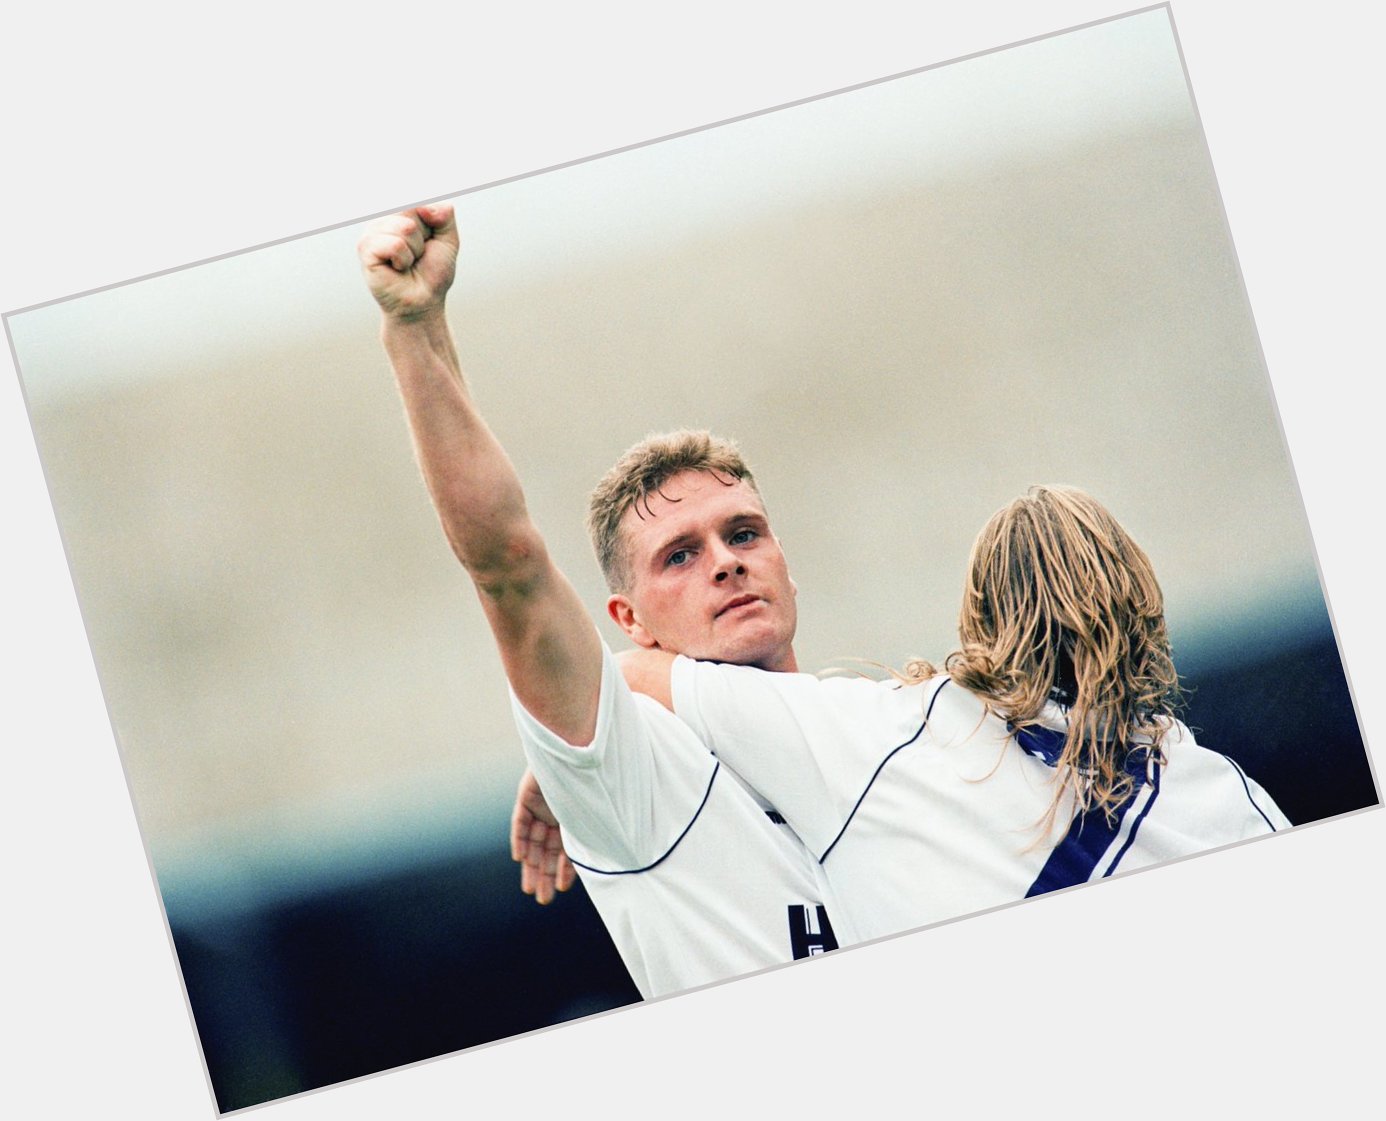 Happy birthday to the brilliant Paul Gascoigne from the Spurs fans 